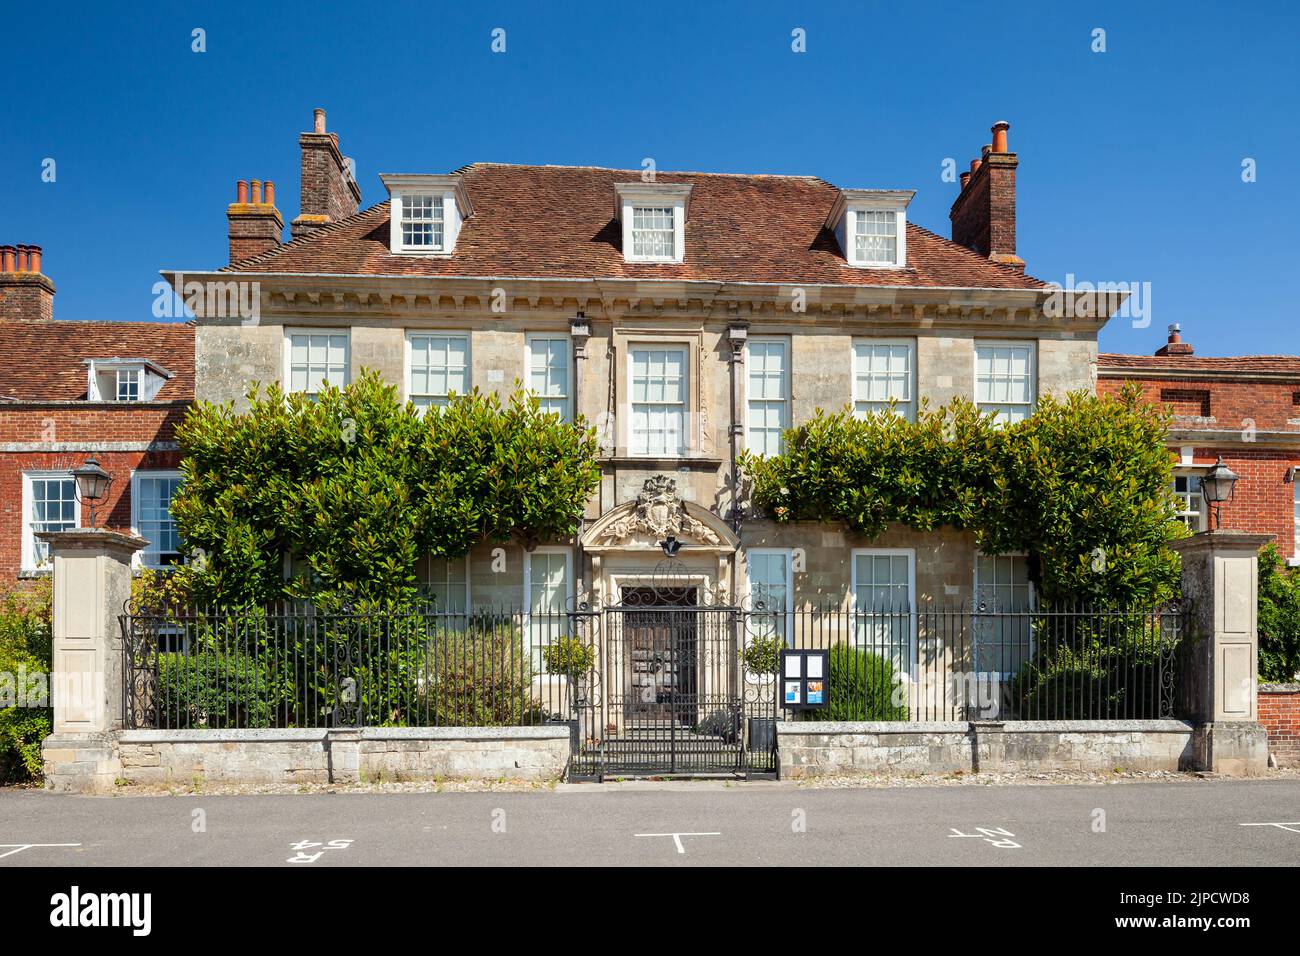 Sommernachmittag im Mompesson House in Salisbury, Wiltshire, England. Stockfoto